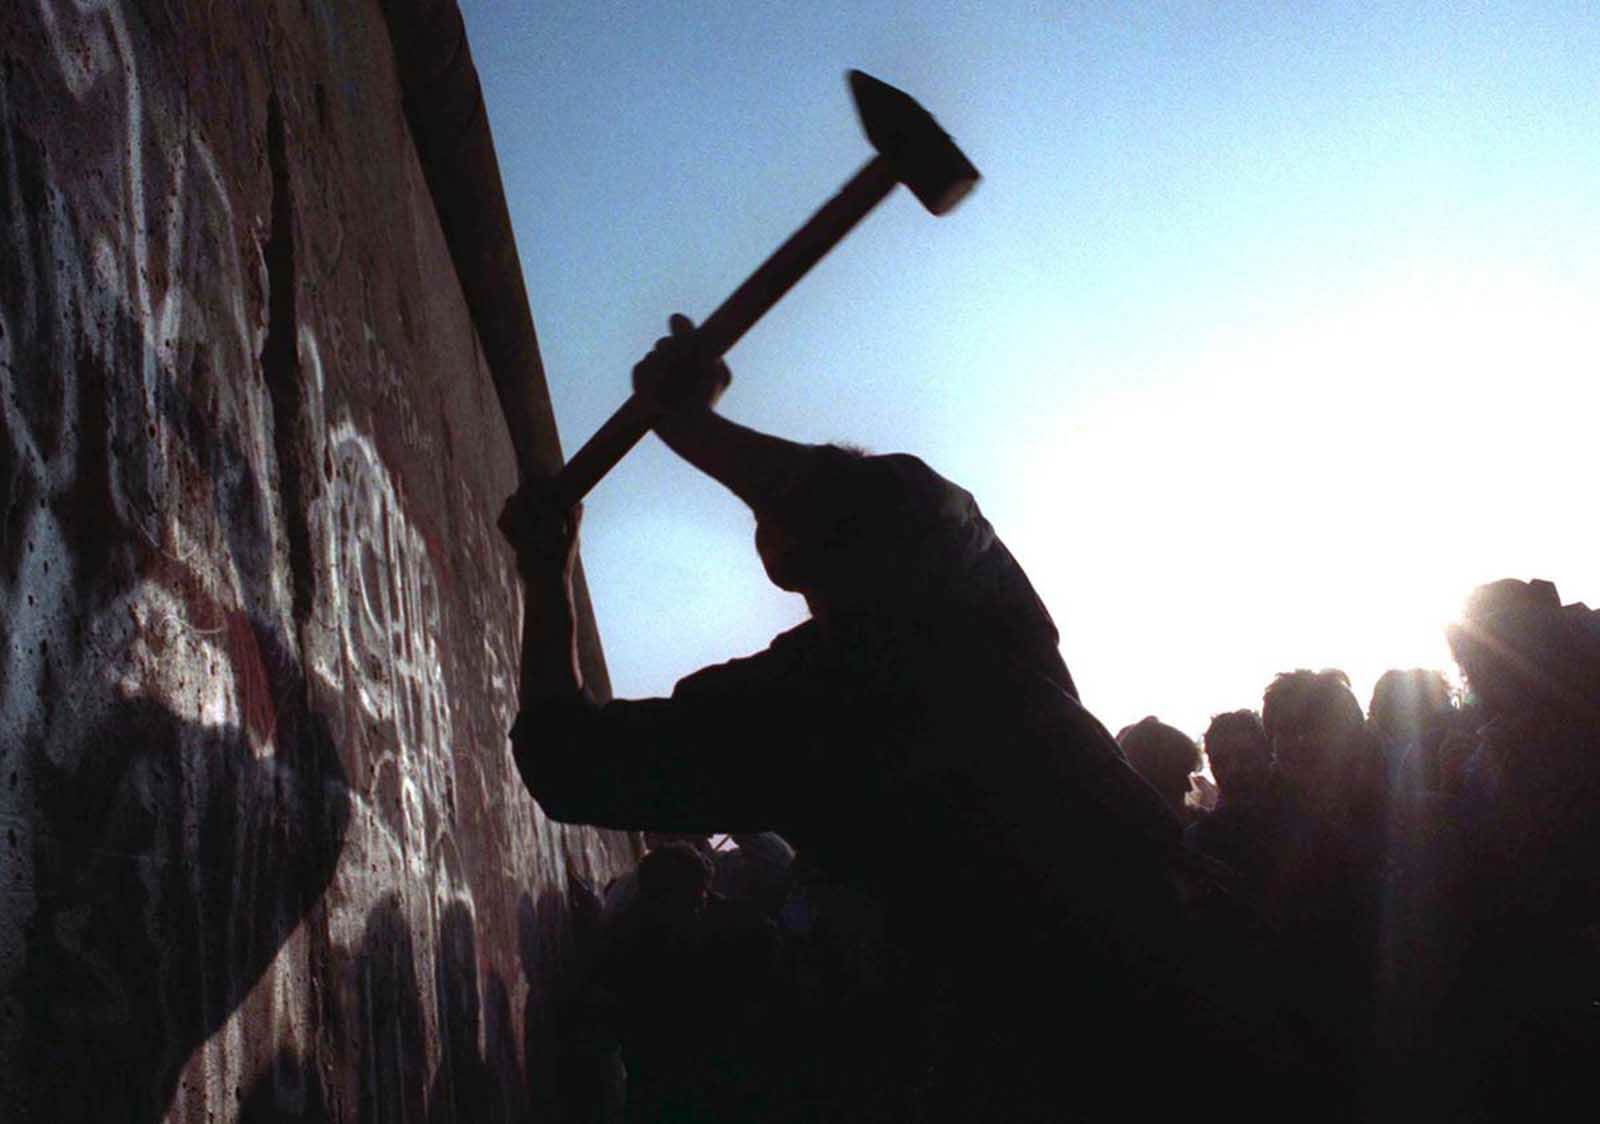 A man hammers away at the Berlin Wall on November 12, 1989 as the border barrier between East and West Germany was torn down.